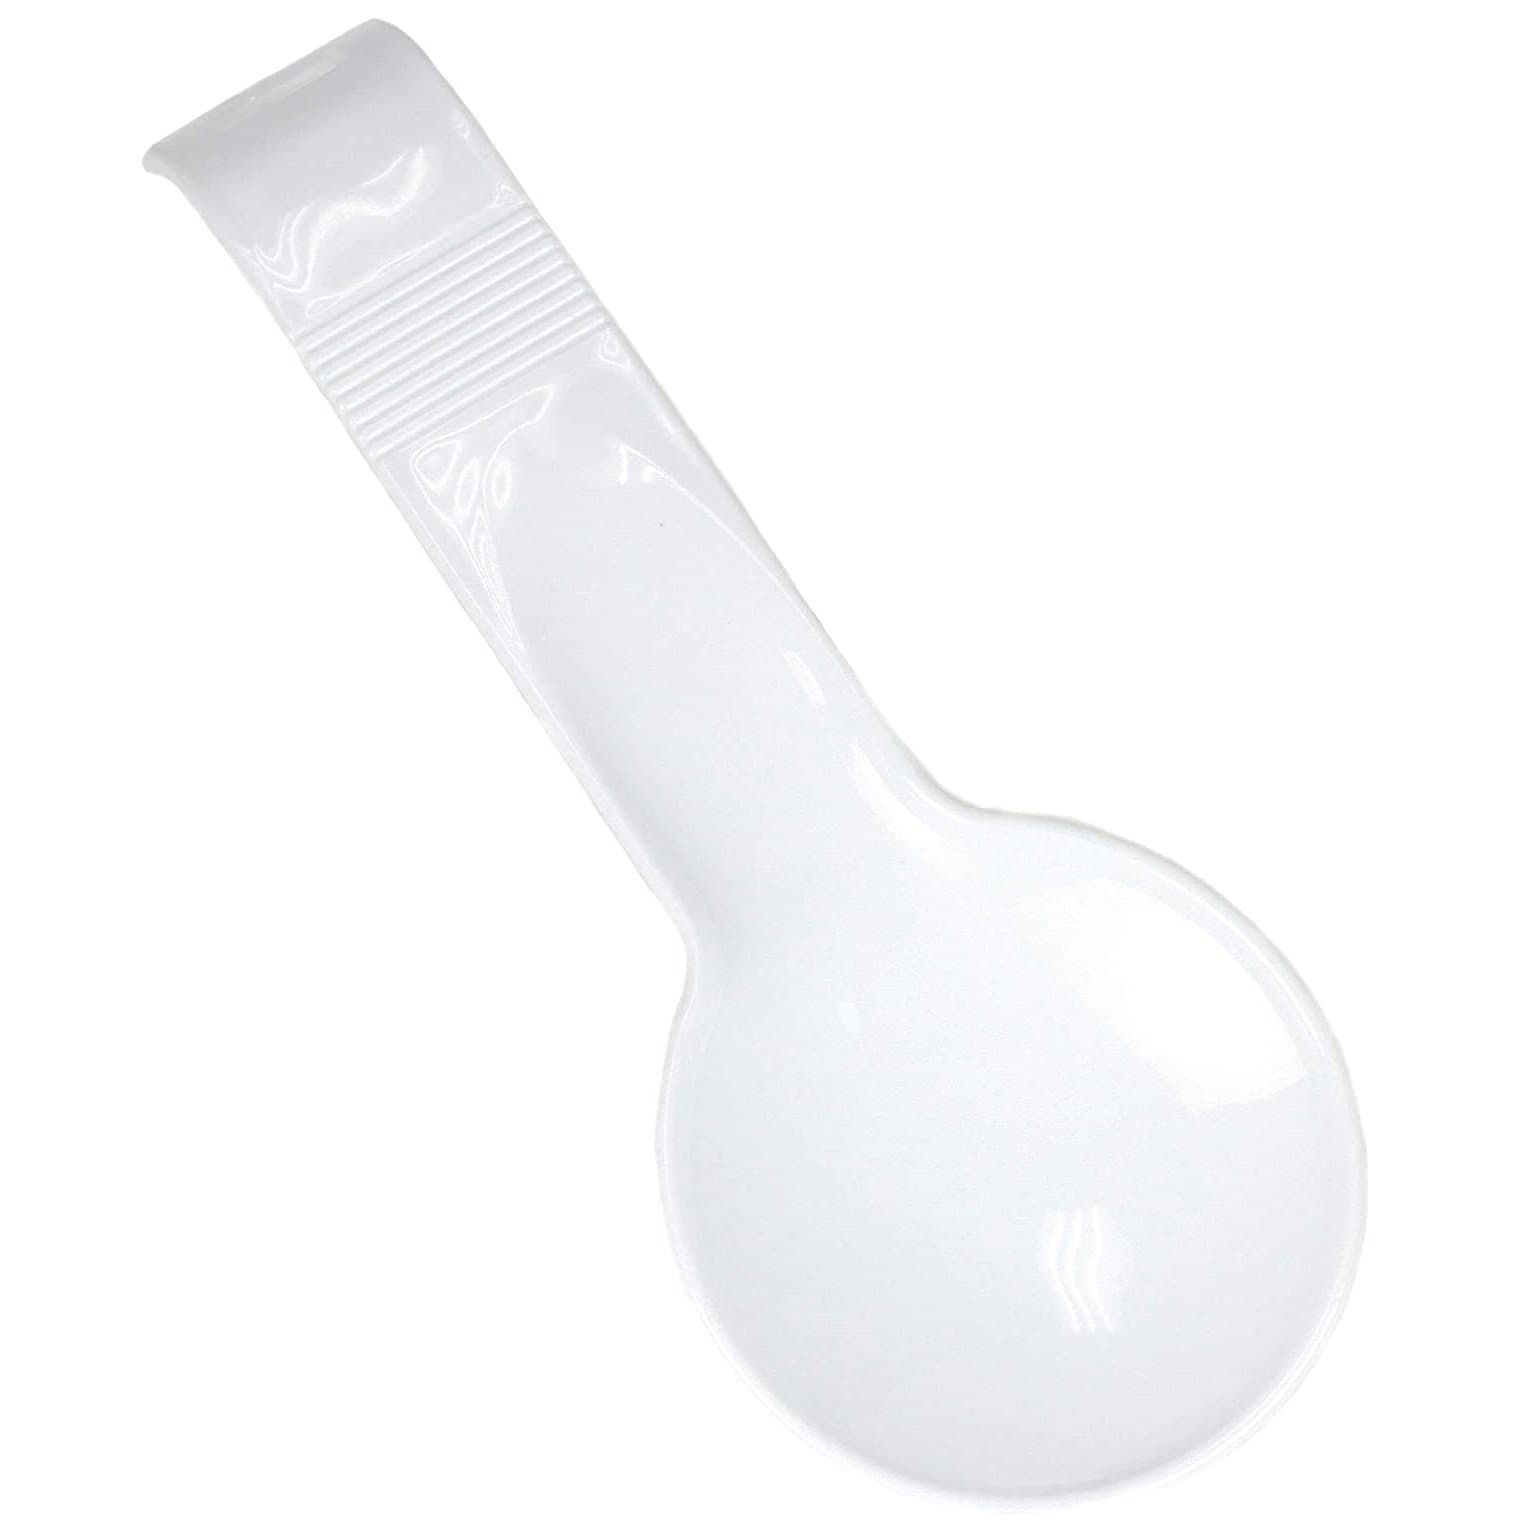 https://ak1.ostkcdn.com/images/products/is/images/direct/f740b93160102fa6c5b40393ae5f8d07841ed473/Chef-Craft-11.75%22-Long-Spoon-Rest-White---Keeps-Your-Stovetop-Clean.jpg